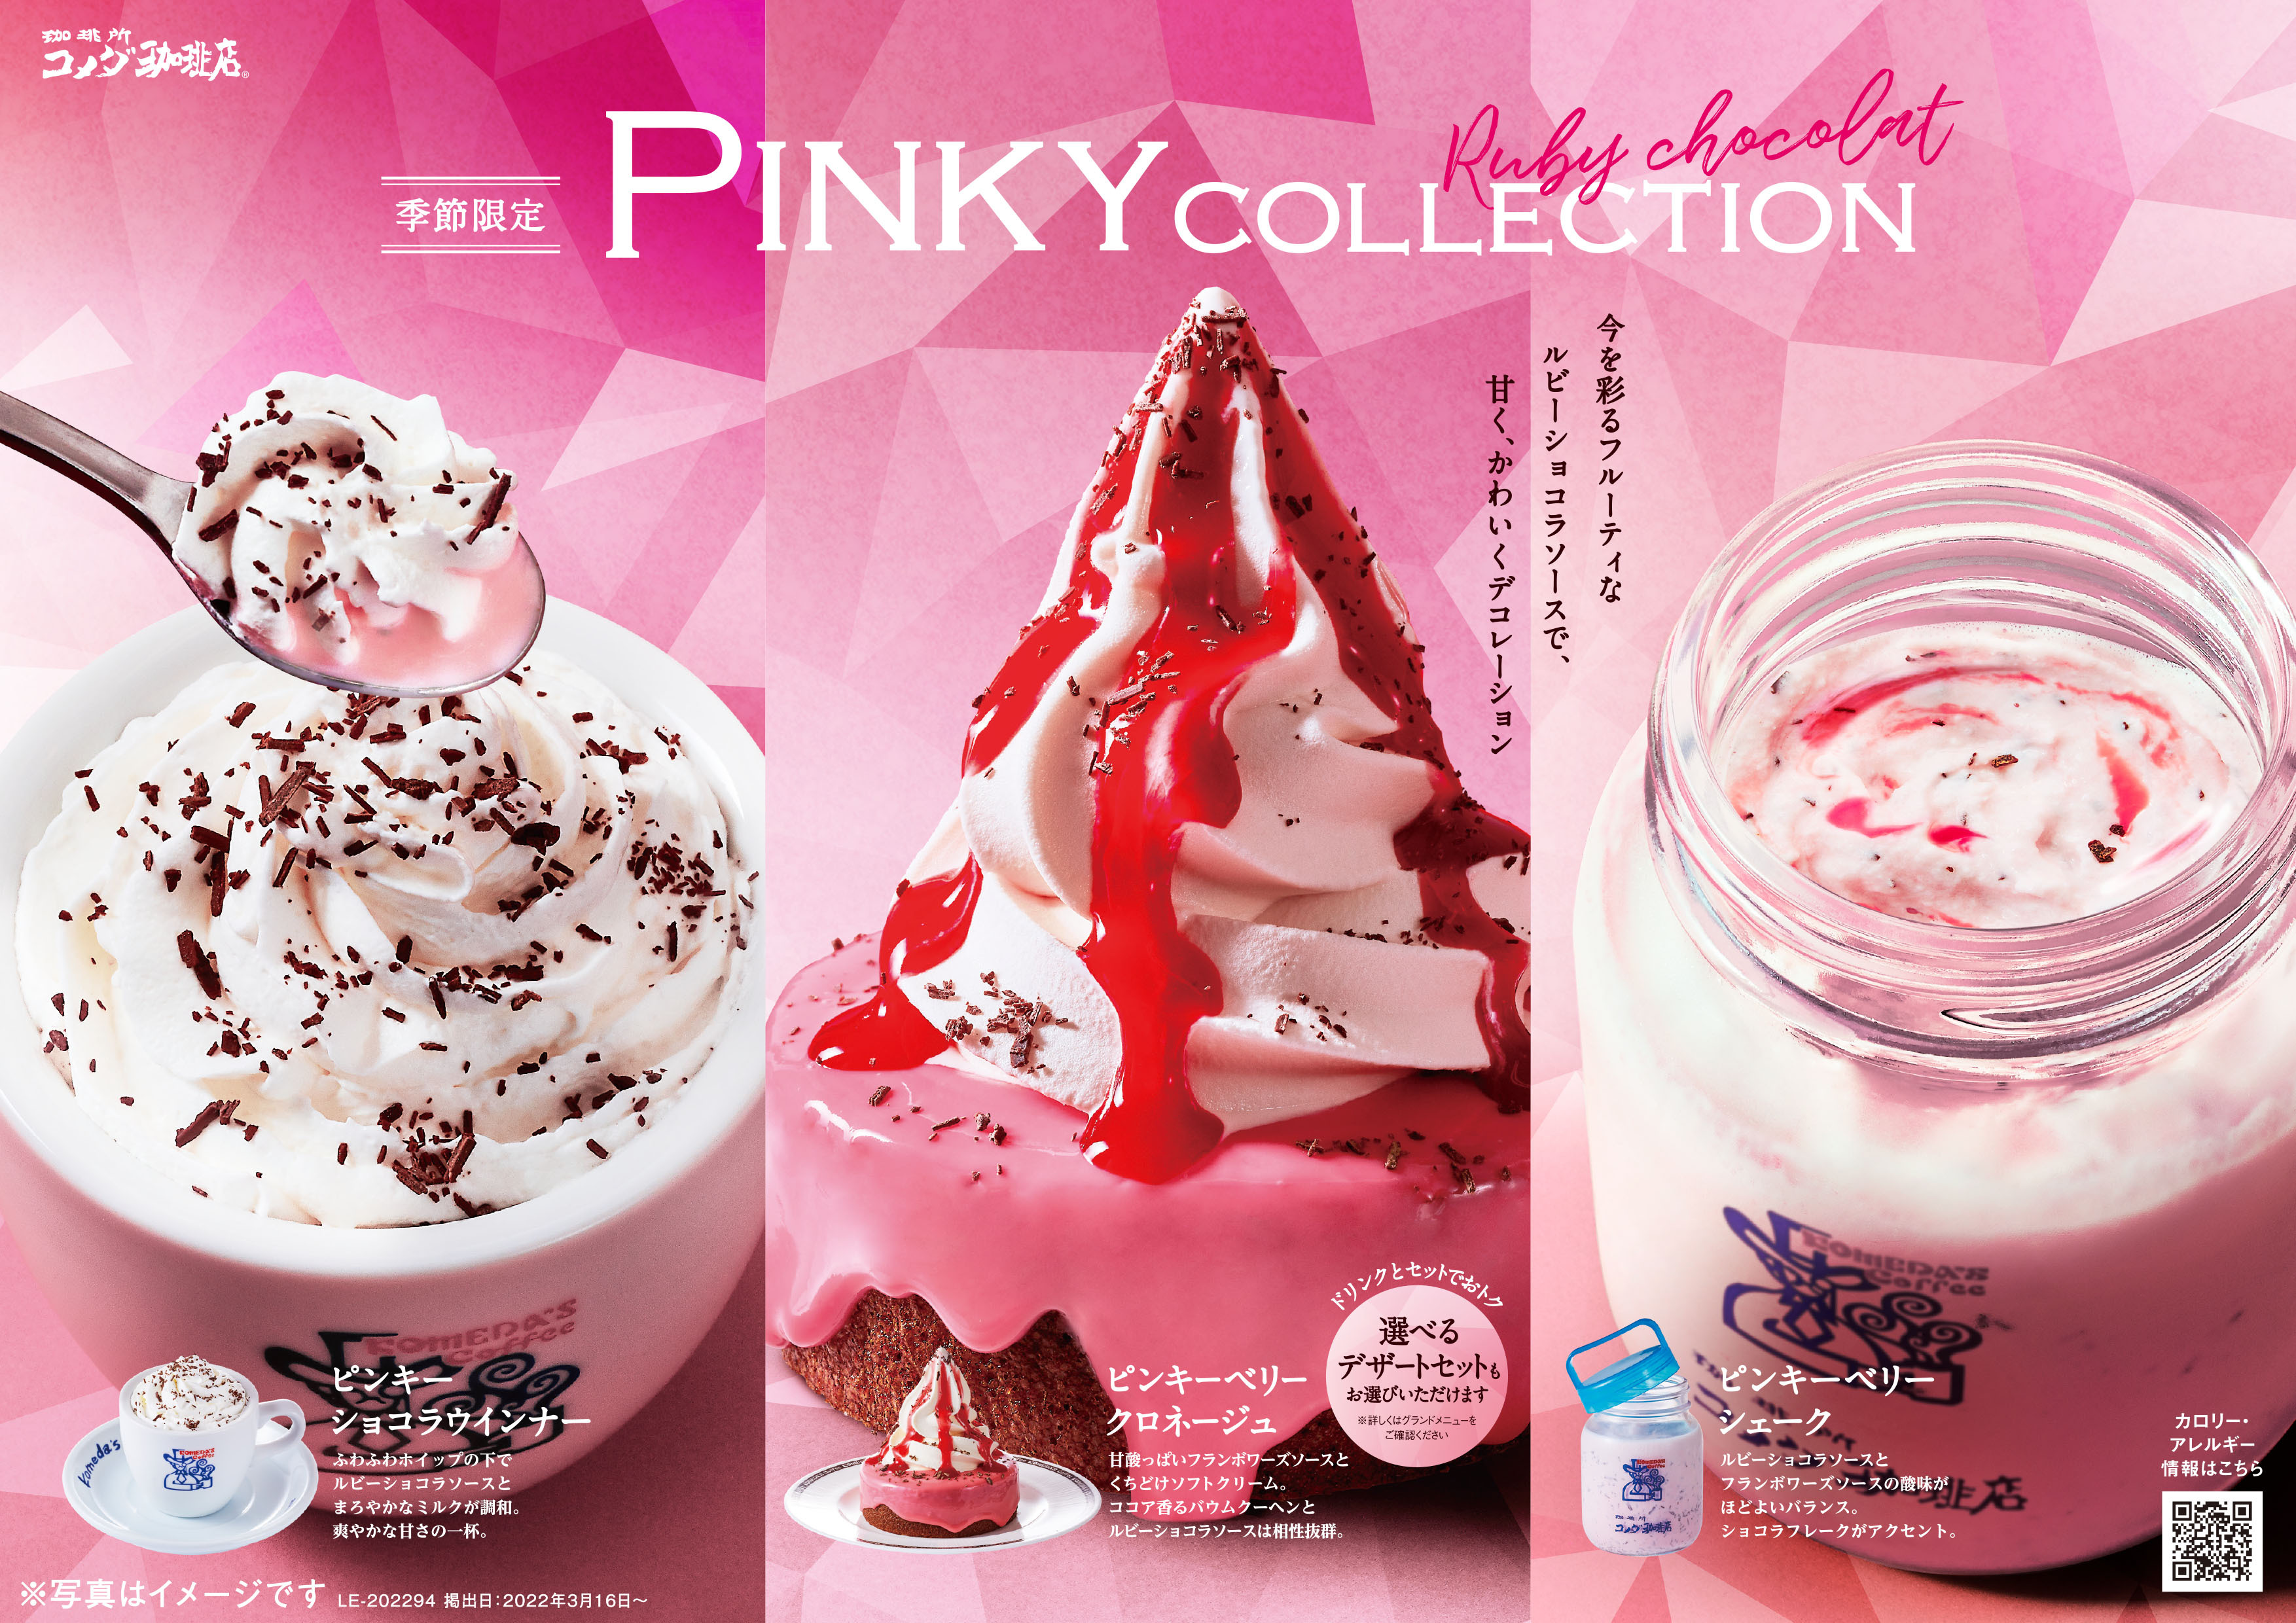 PINKY COLLECTION